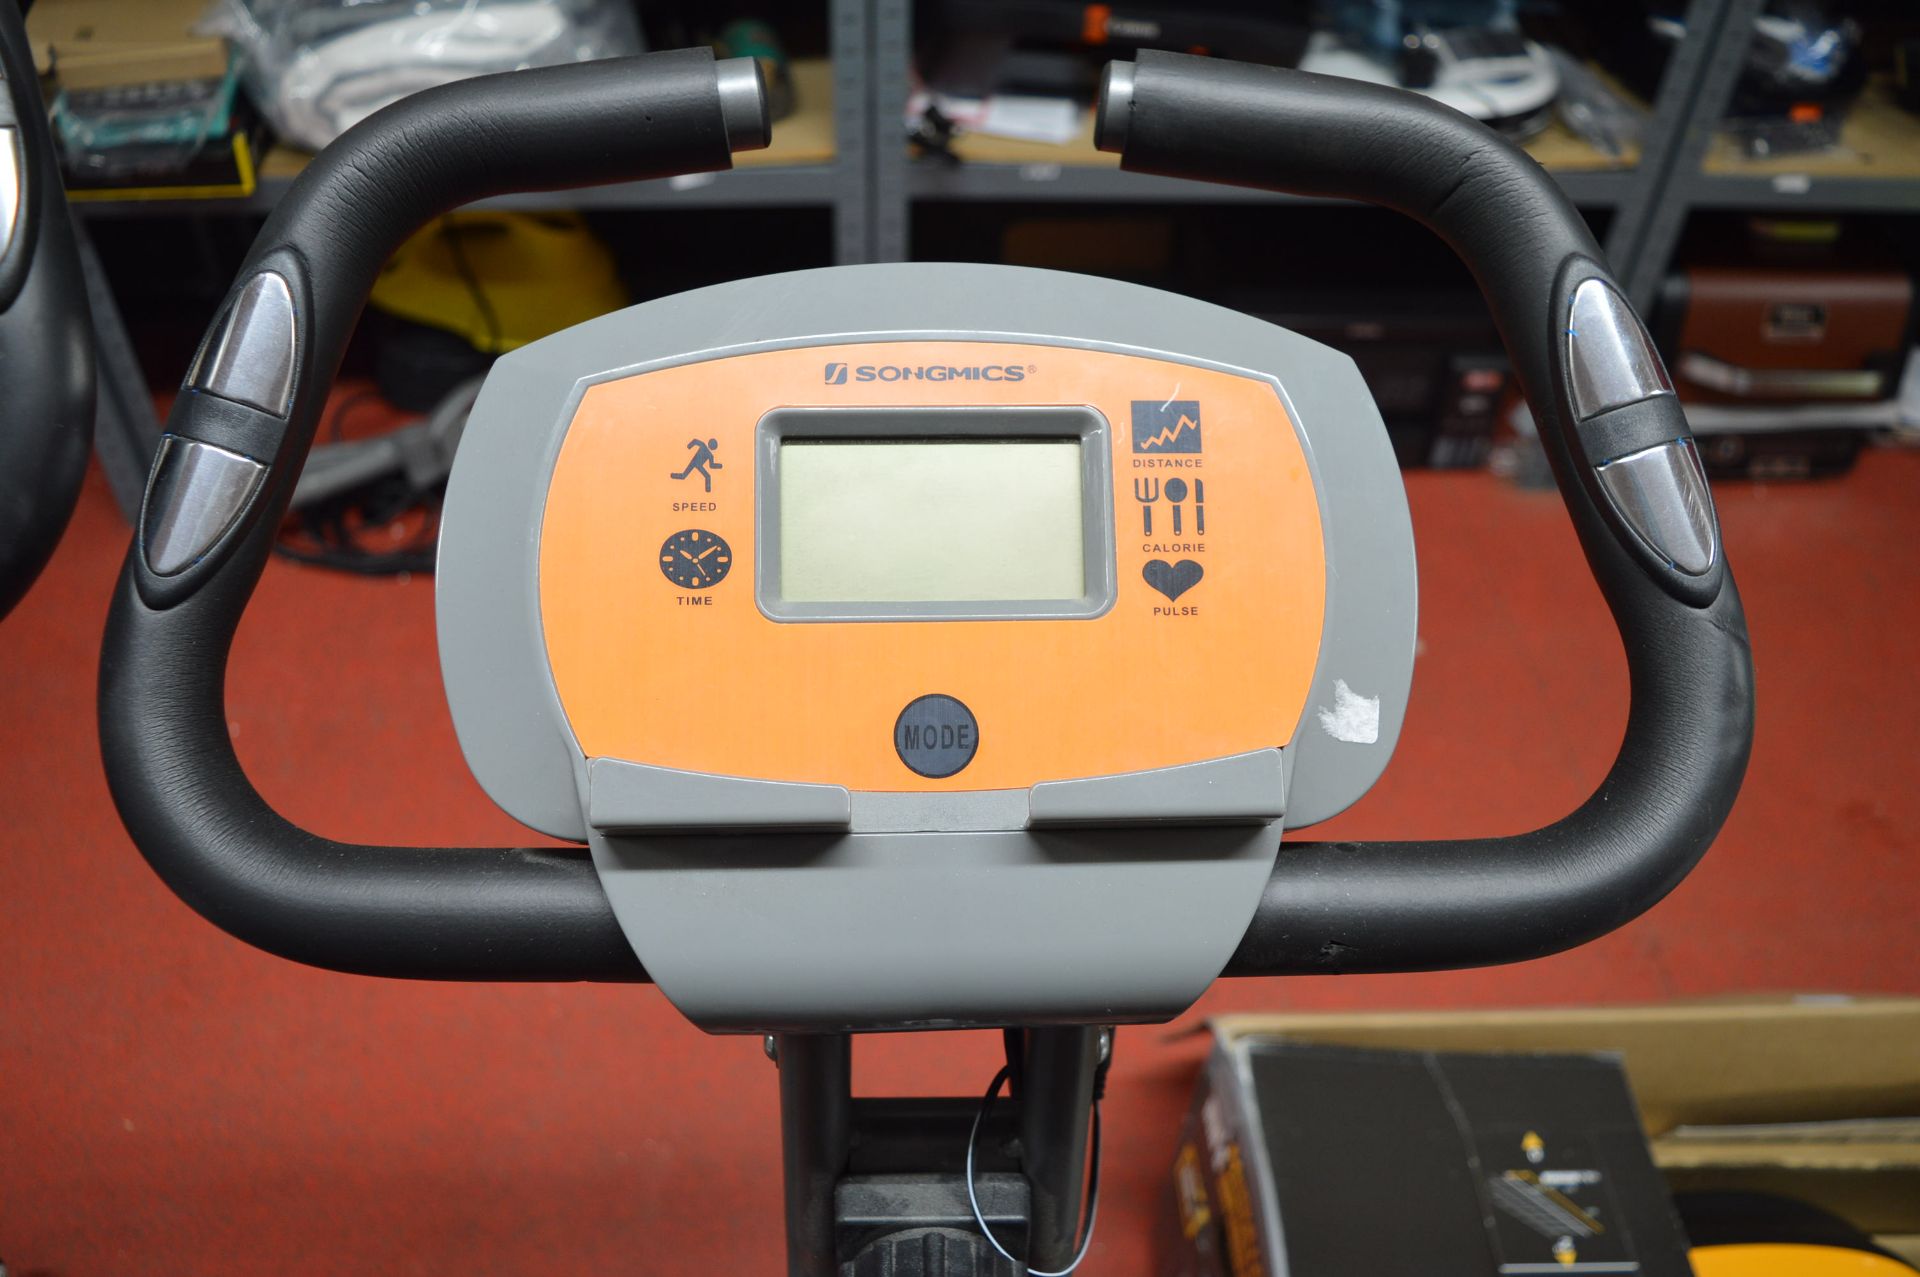 *Song Mics Exercise Bike - Image 2 of 3